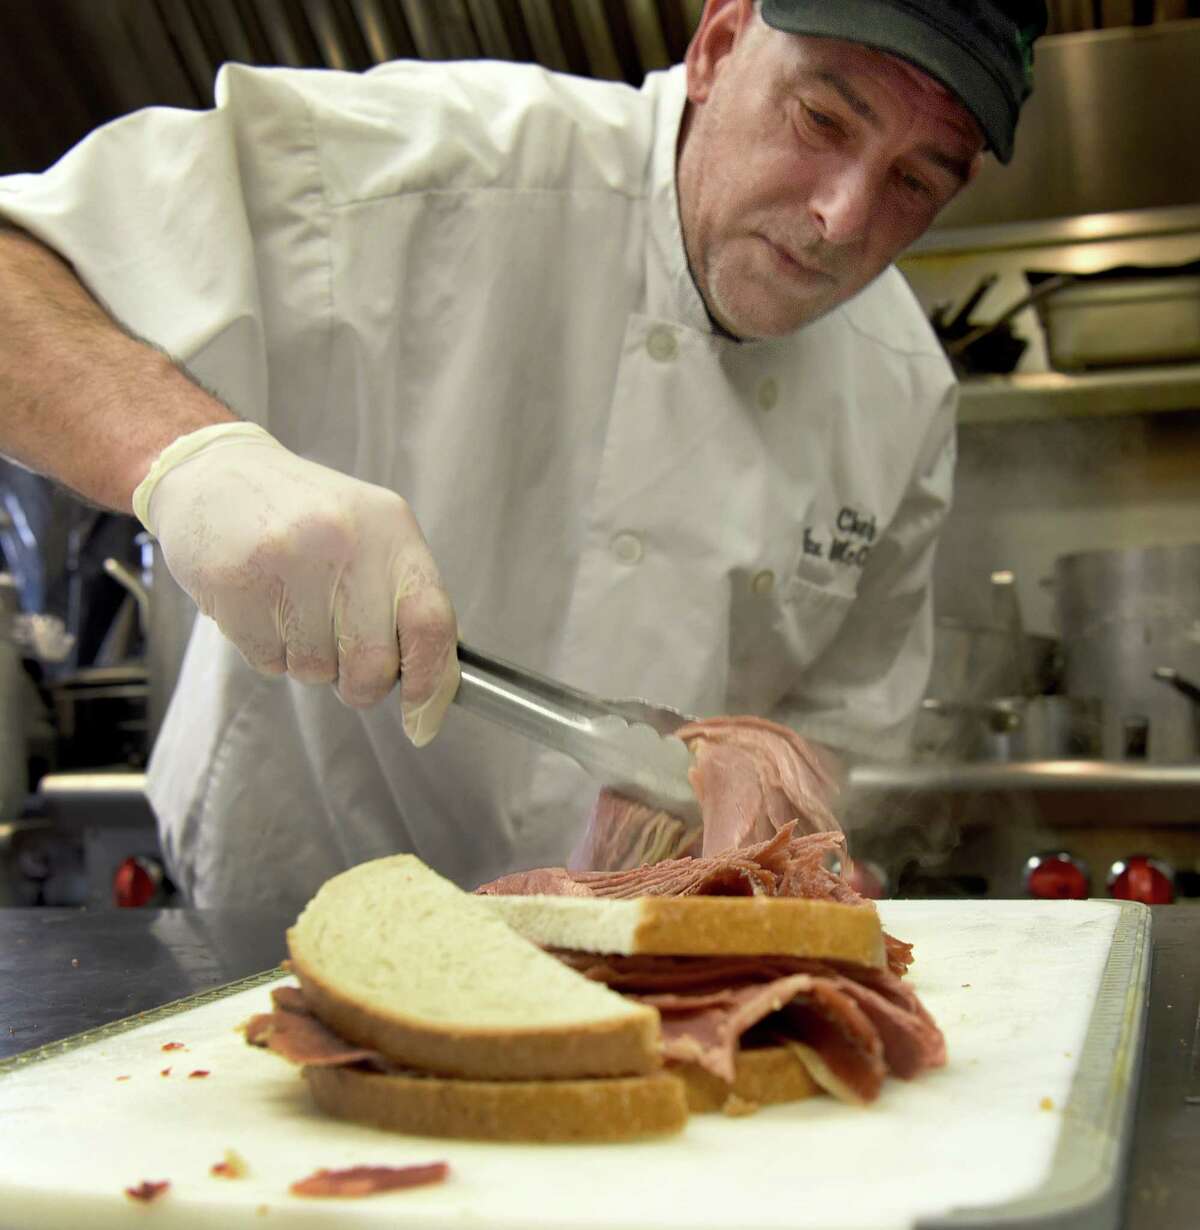 Daniel McCarthy, of Bethel, the chef at the Greater Danbury Irish Cultural Center, makes corned beef sandwiches for a lunch crowd Friday, March 17, 2023, St. Patrick’s Day.